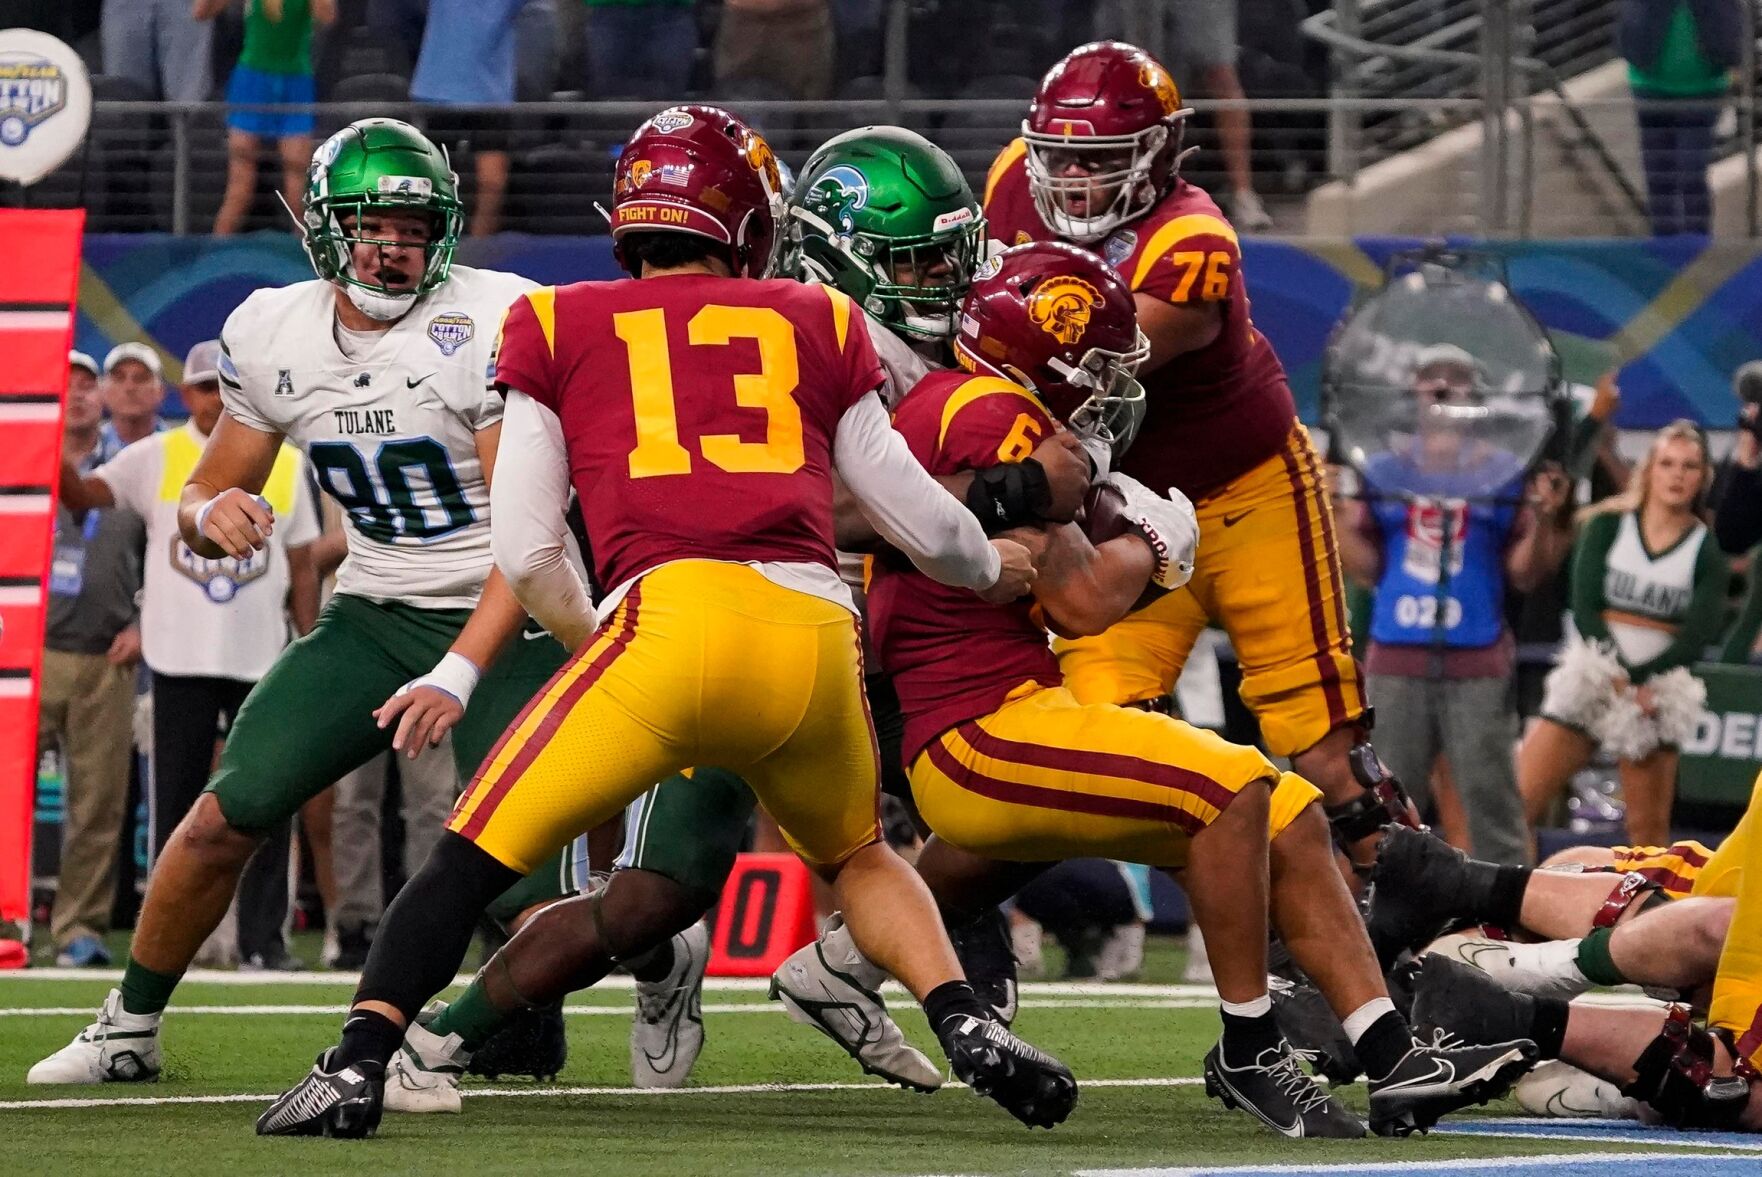 Tulane and USC combined for a parade of Cotton Bowl records Tulane